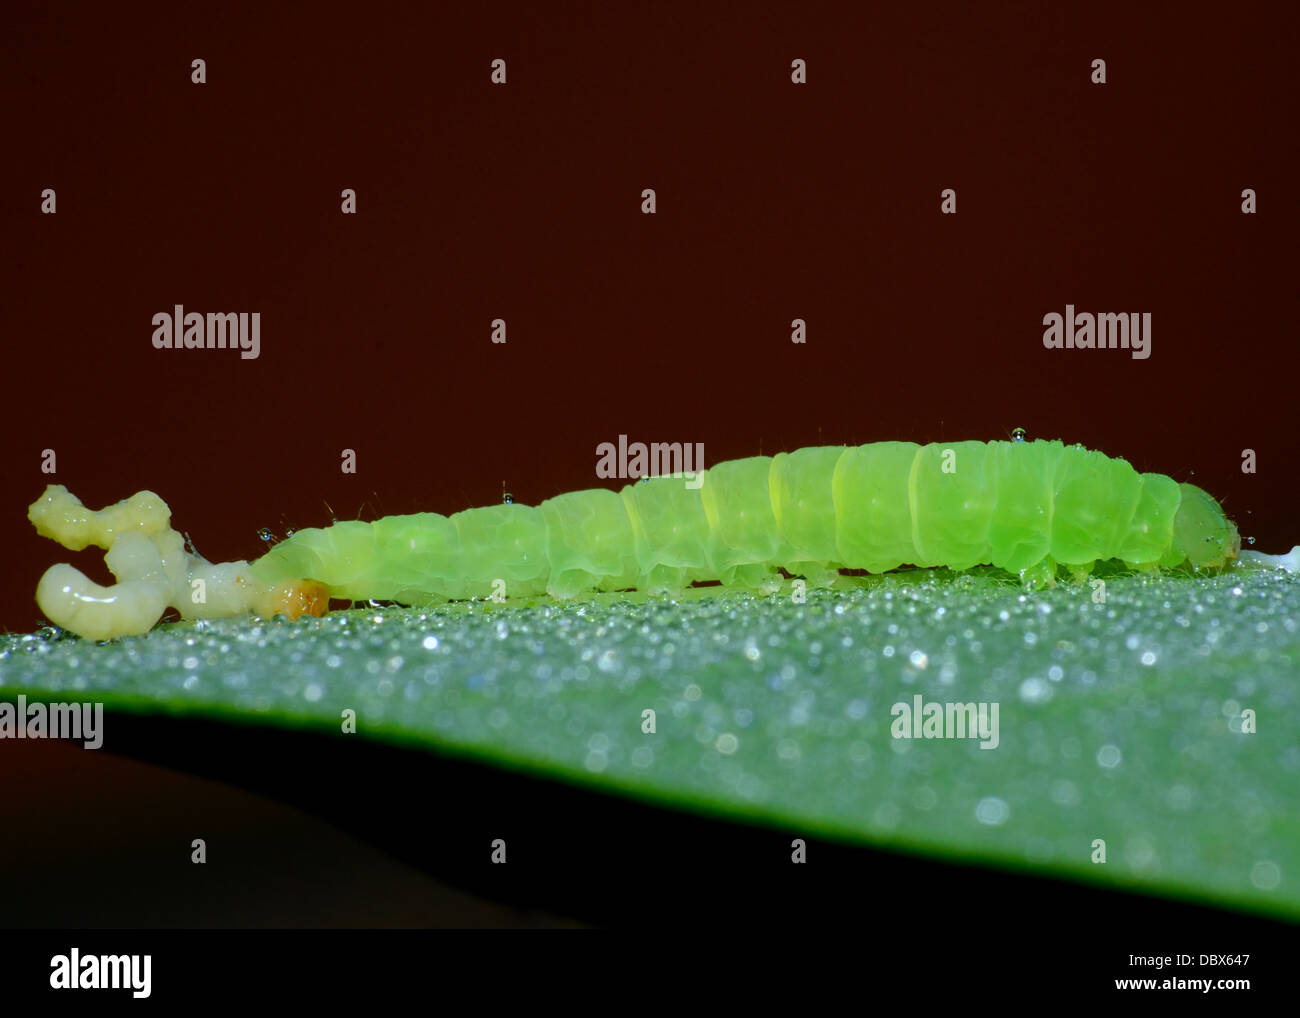 A caterpillar perched on a plant leaf. Stock Photo